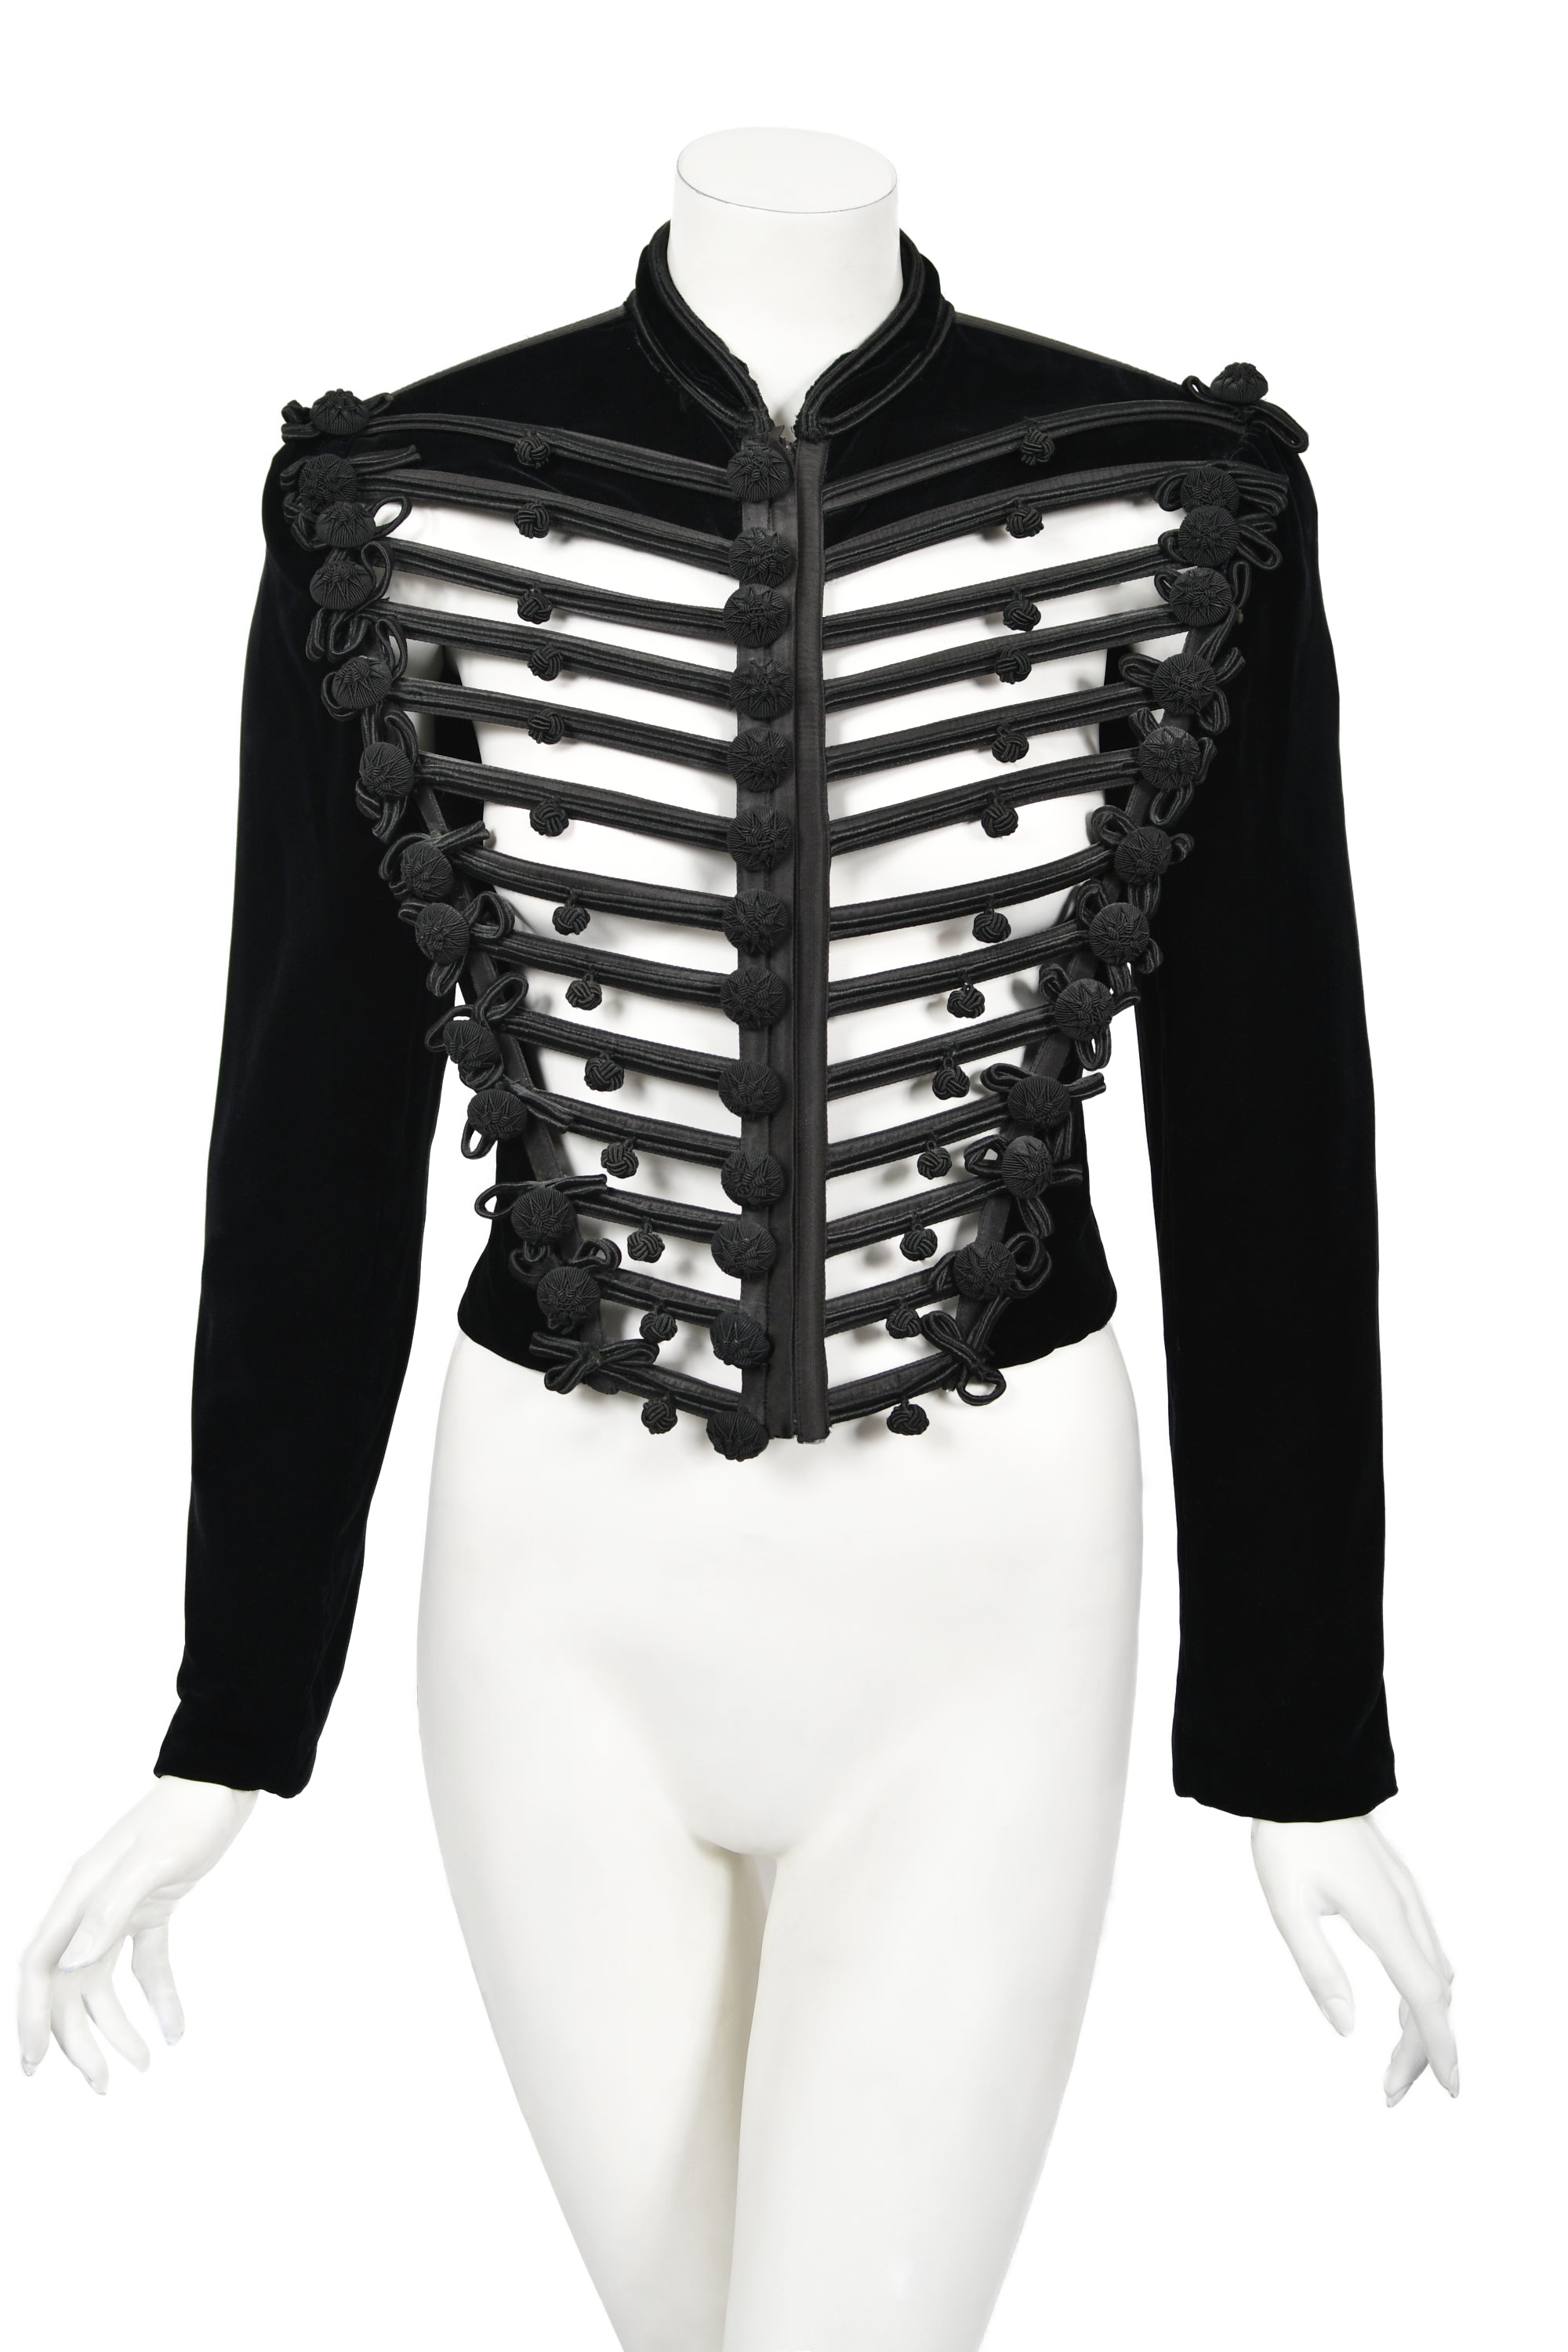 Black corset- jacket with laces in the back Jean-Paul Gaultier